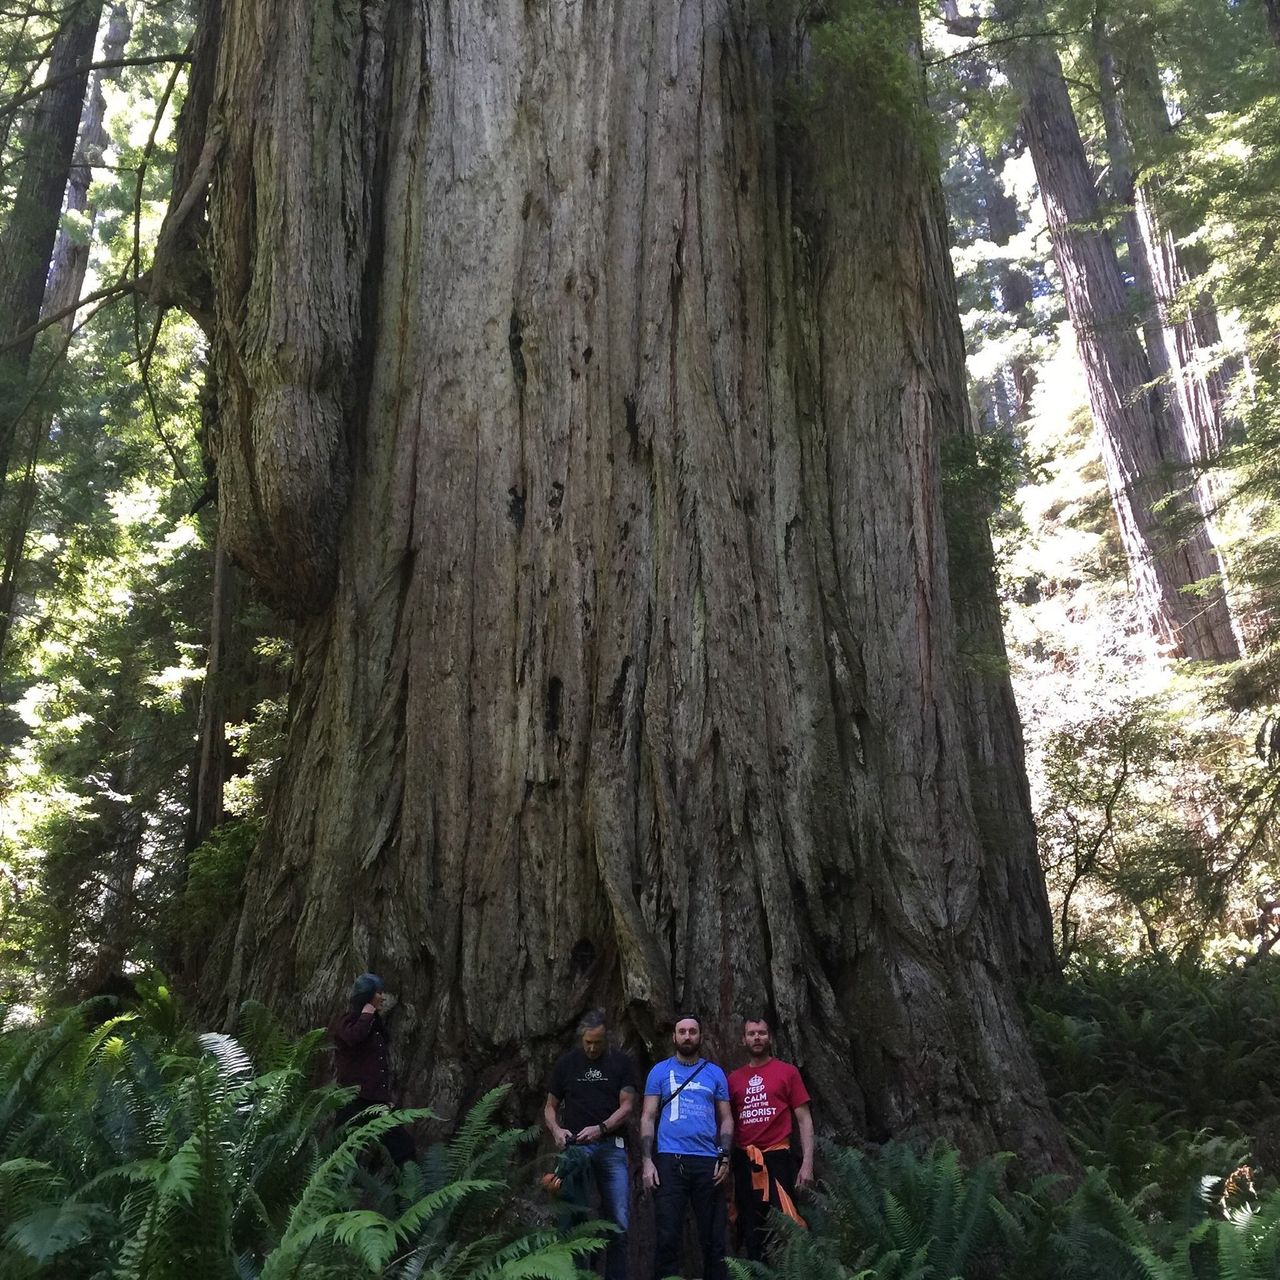 Archangel's climbing team poses at a giant tree.